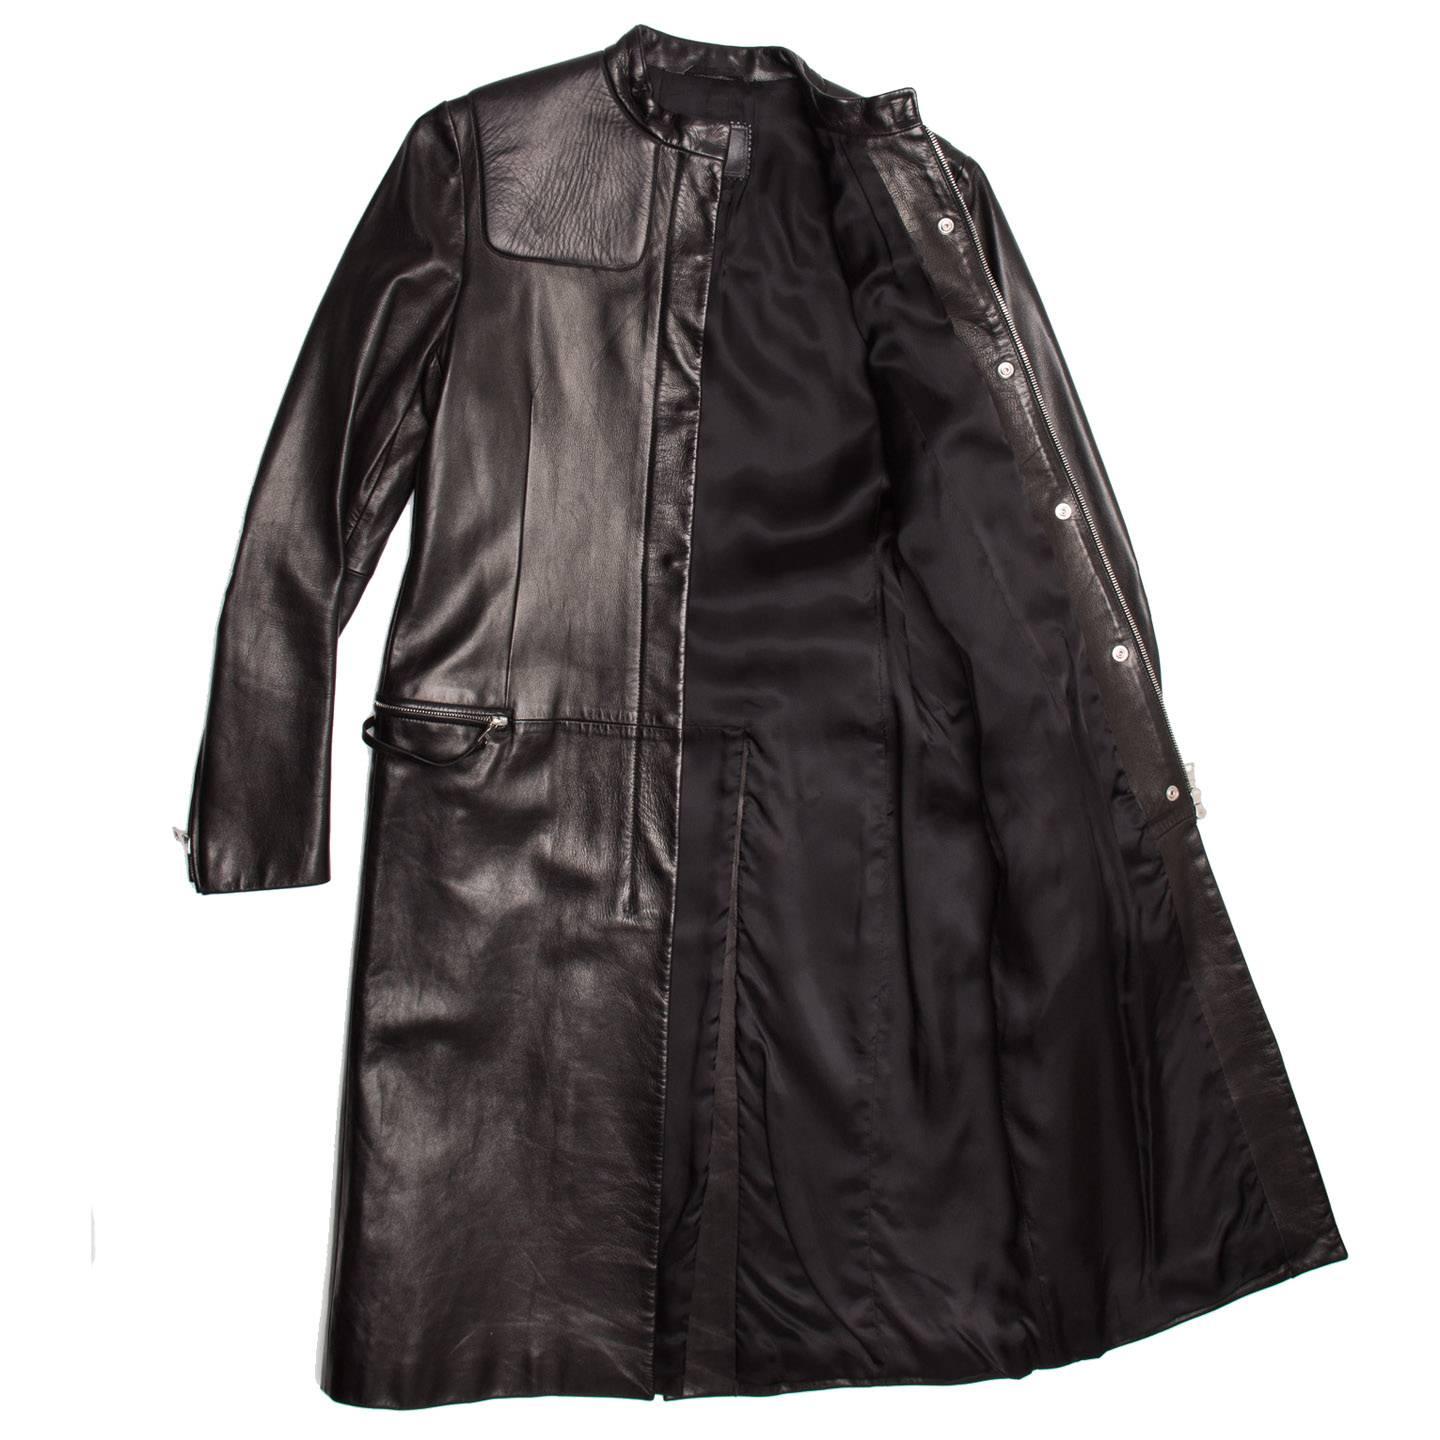 Prada Black Leather Racer Coat In Excellent Condition For Sale In Brooklyn, NY